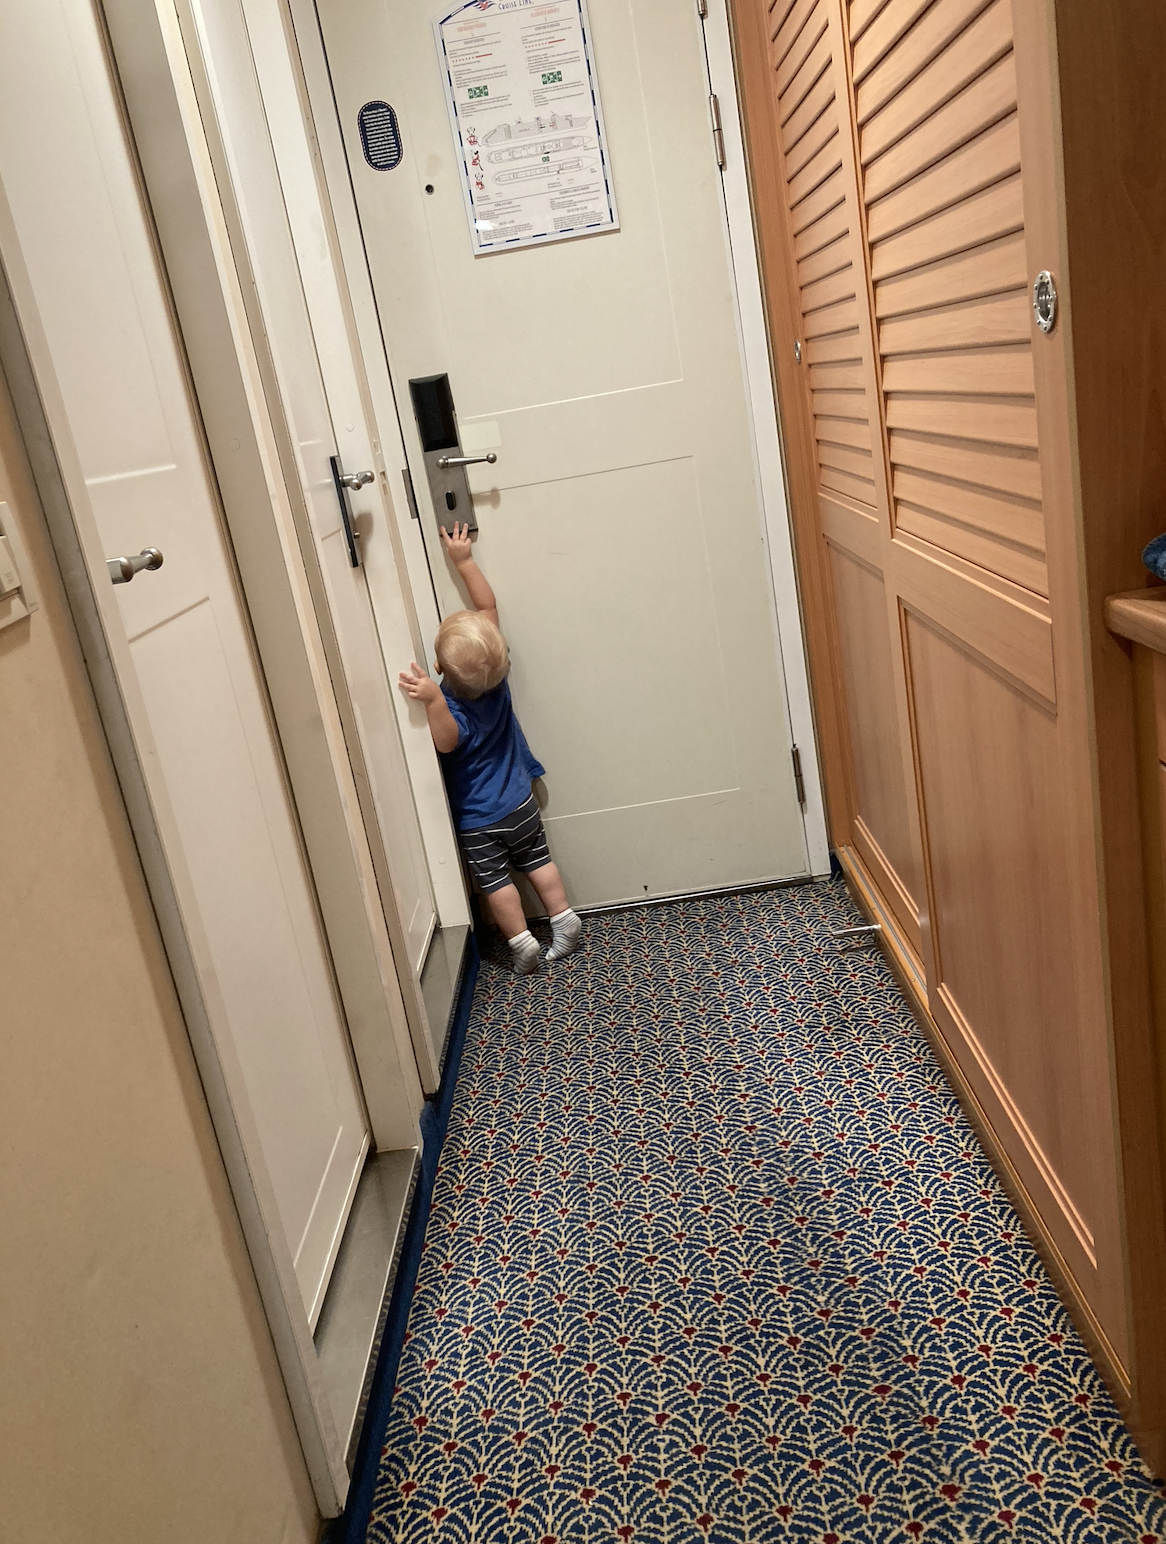 A toddler stands on a patterned carpet, reaching up towards a door handle in an indoor hallway